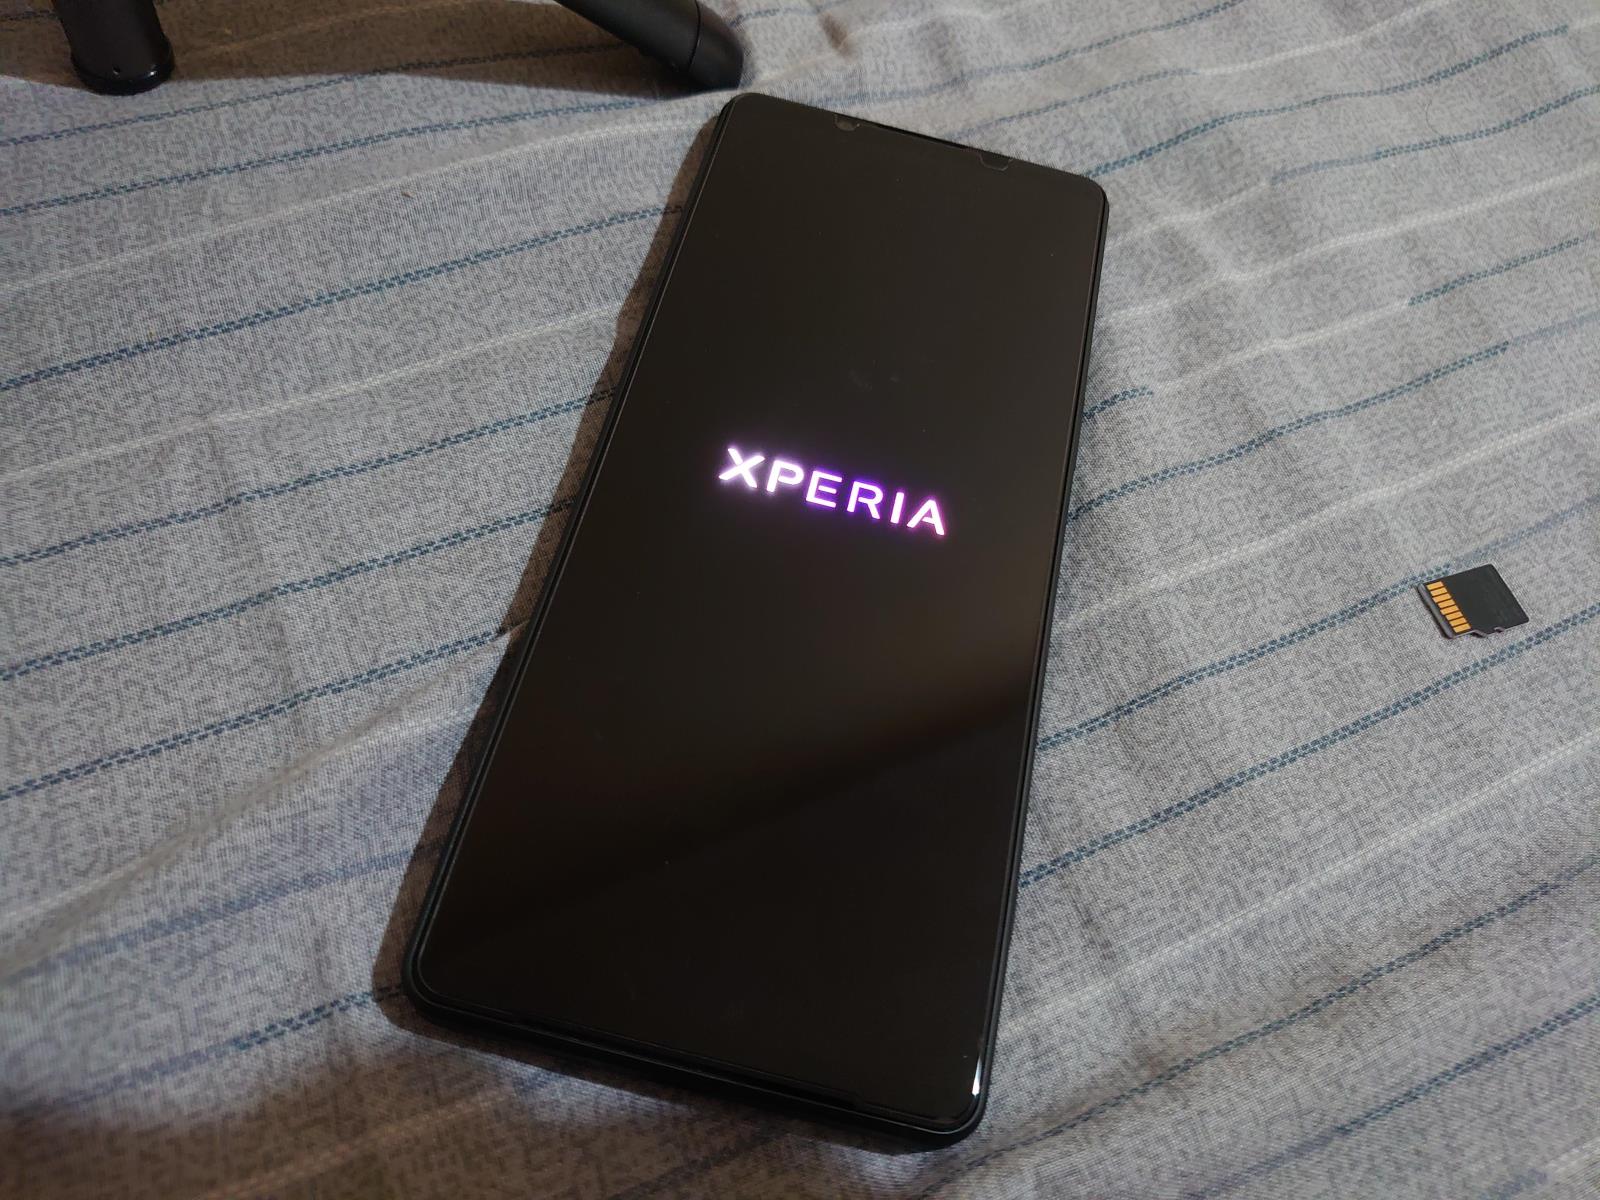 Comprehensive Guide To Resetting Sony Xperia Devices